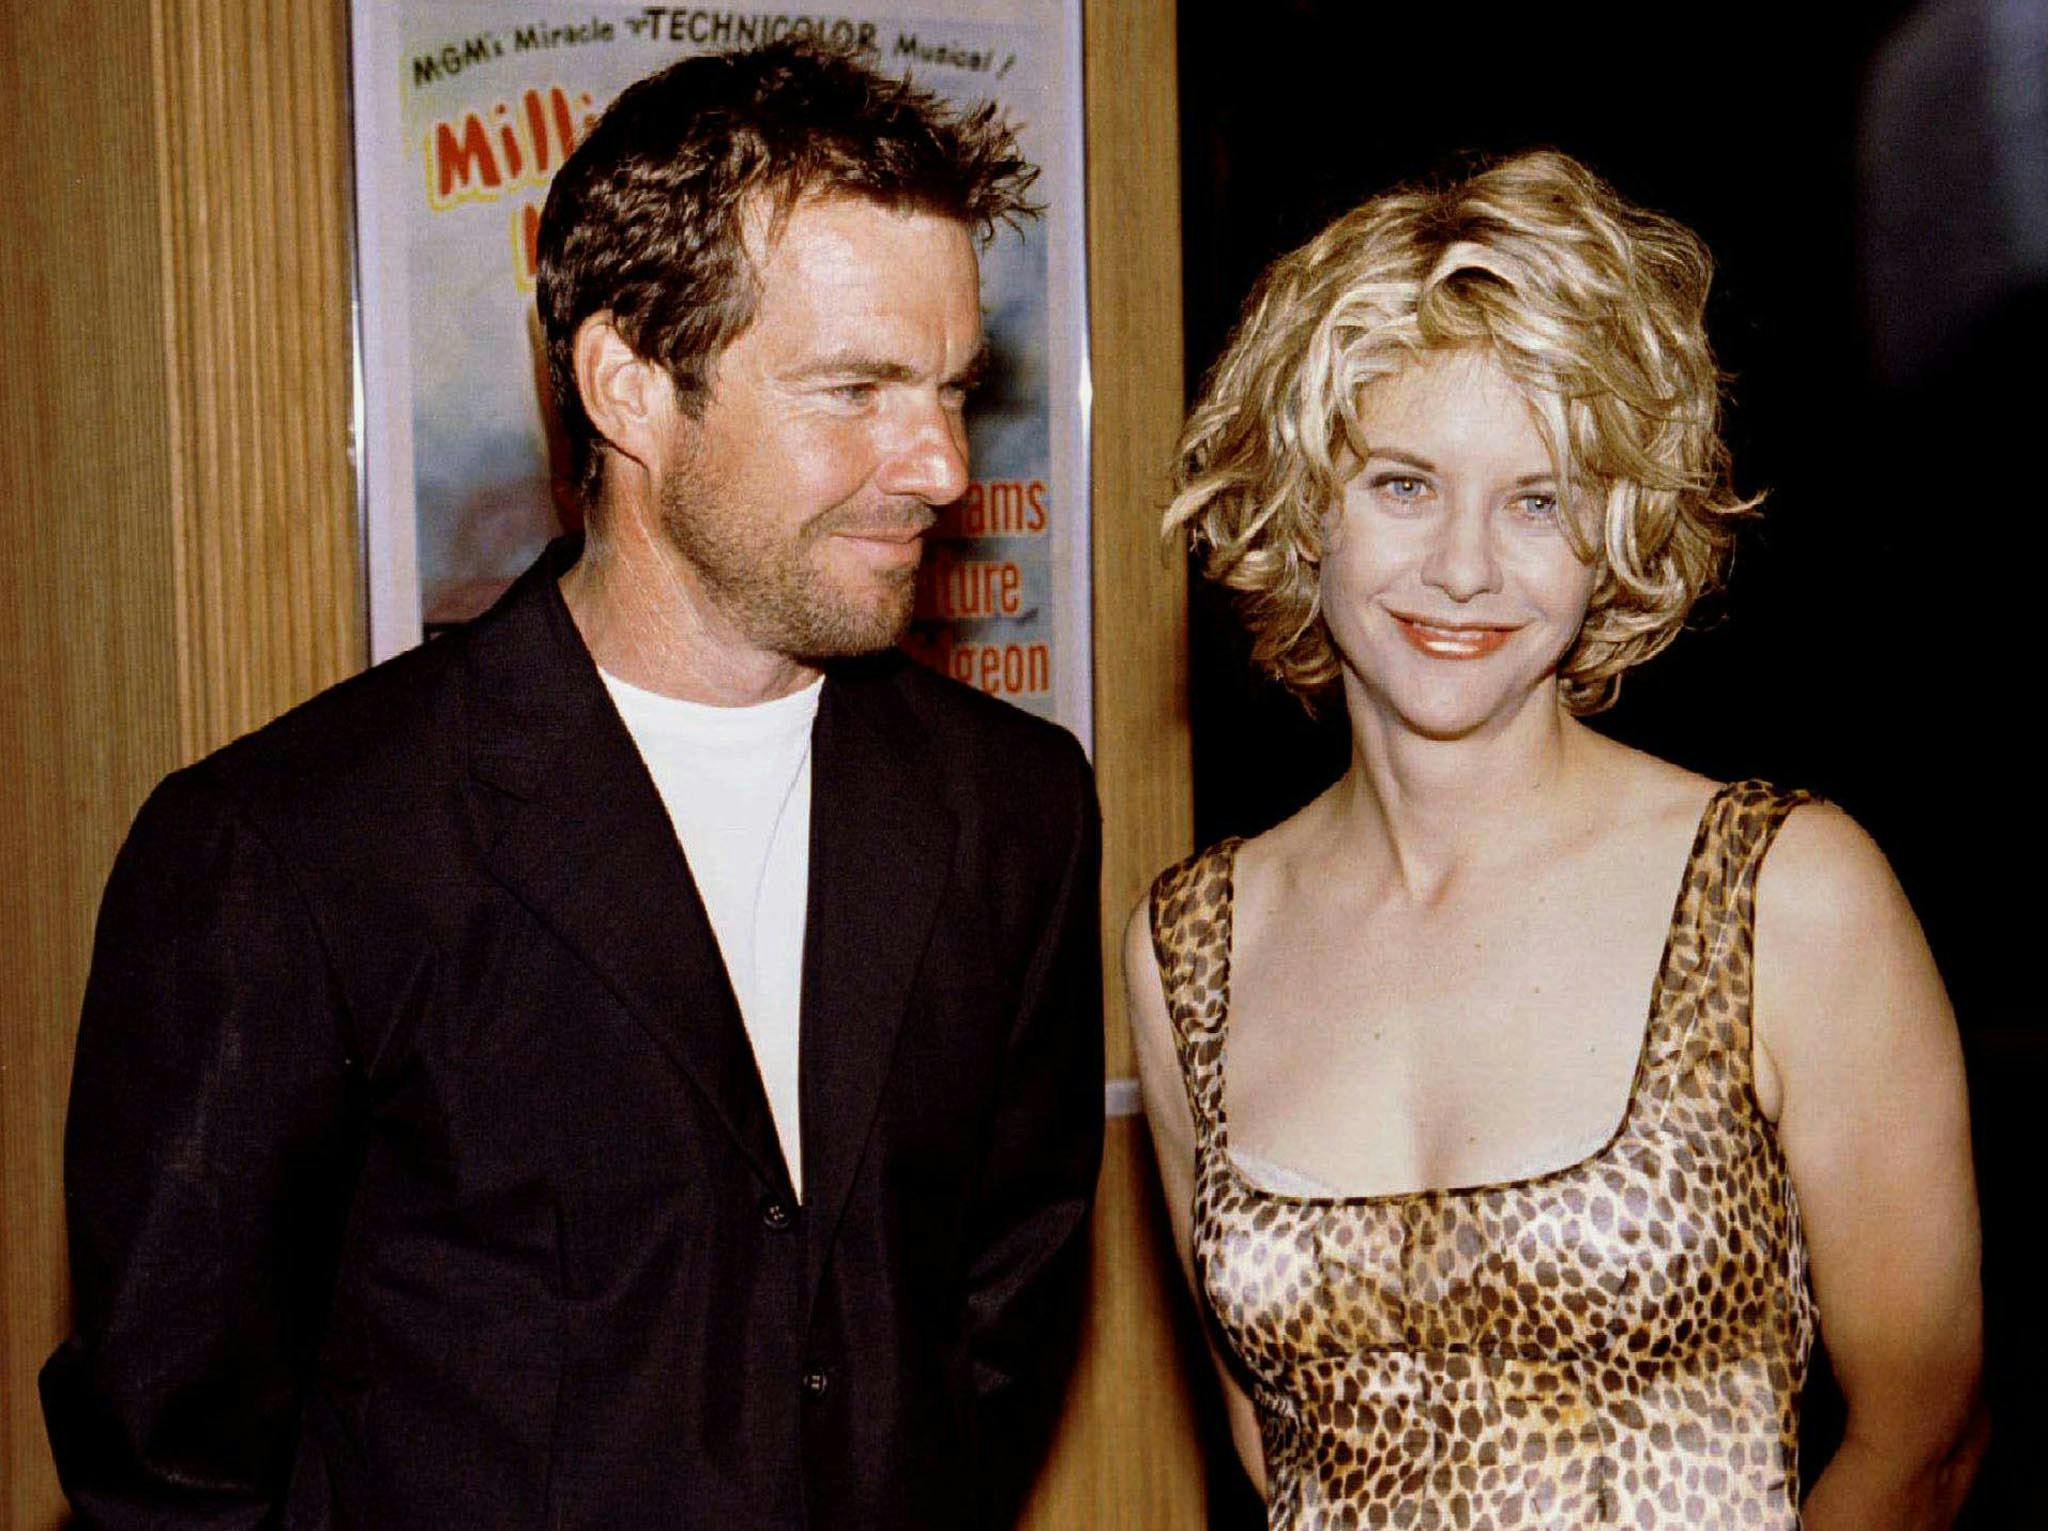 Meg Ryan (R) poses with her husband, actor Dennis Quaid, in this July 8, 1996 file photo. Ryan and Quaid, considered one of Hollywood's steadier couples, have separated after nine years of marriage, their publicist said on Thursday. There was no word on whether they had plans to divorce.